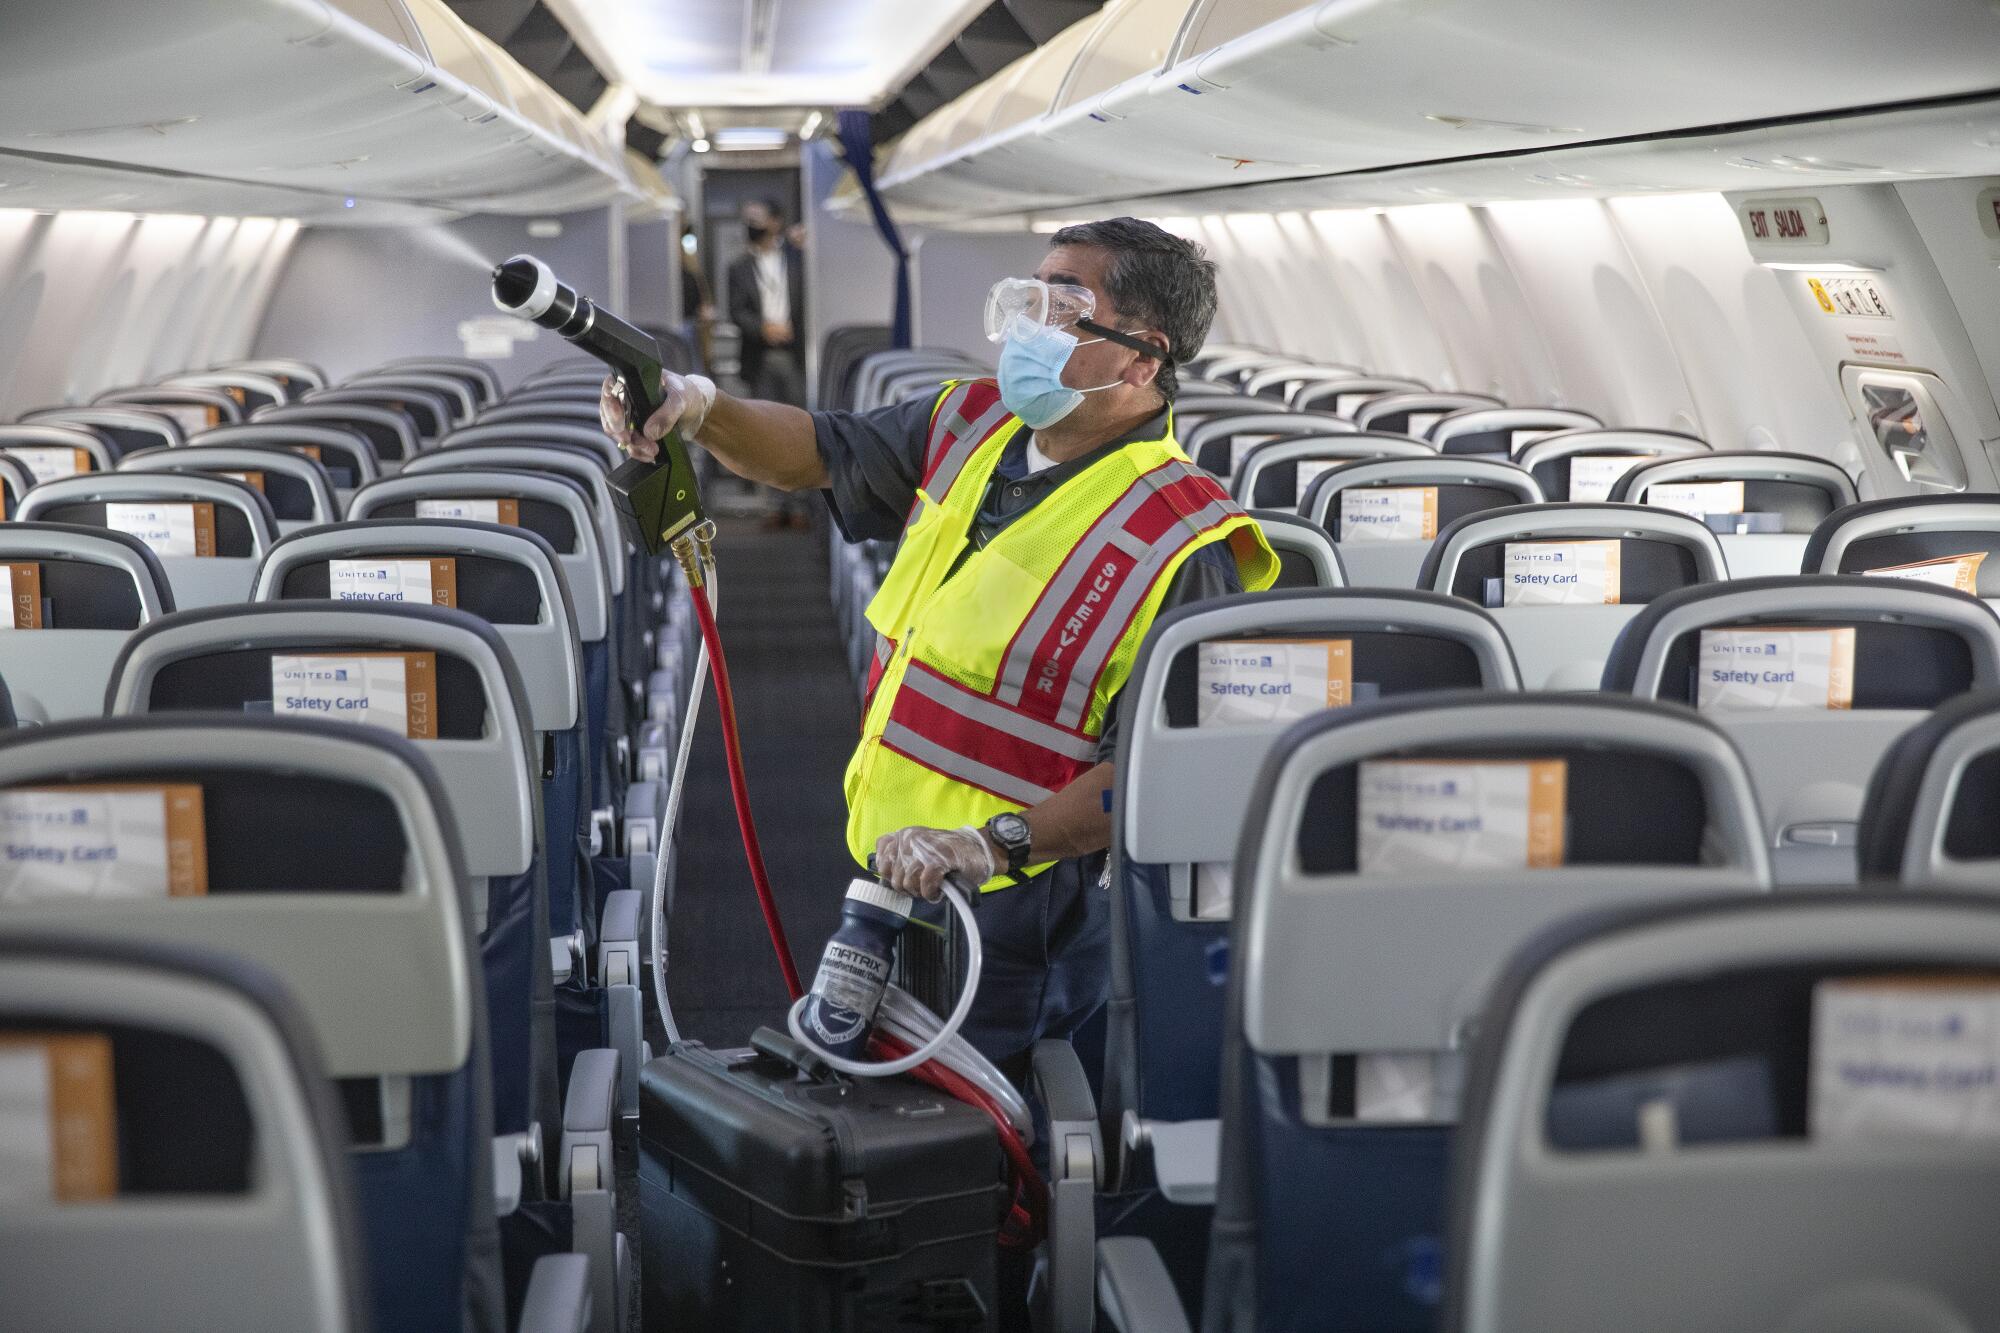 Jose Mendoza uses an electrostatic sprayer to disinfect the cabin of a United Airlines 737 jet on July 9 at LAX.